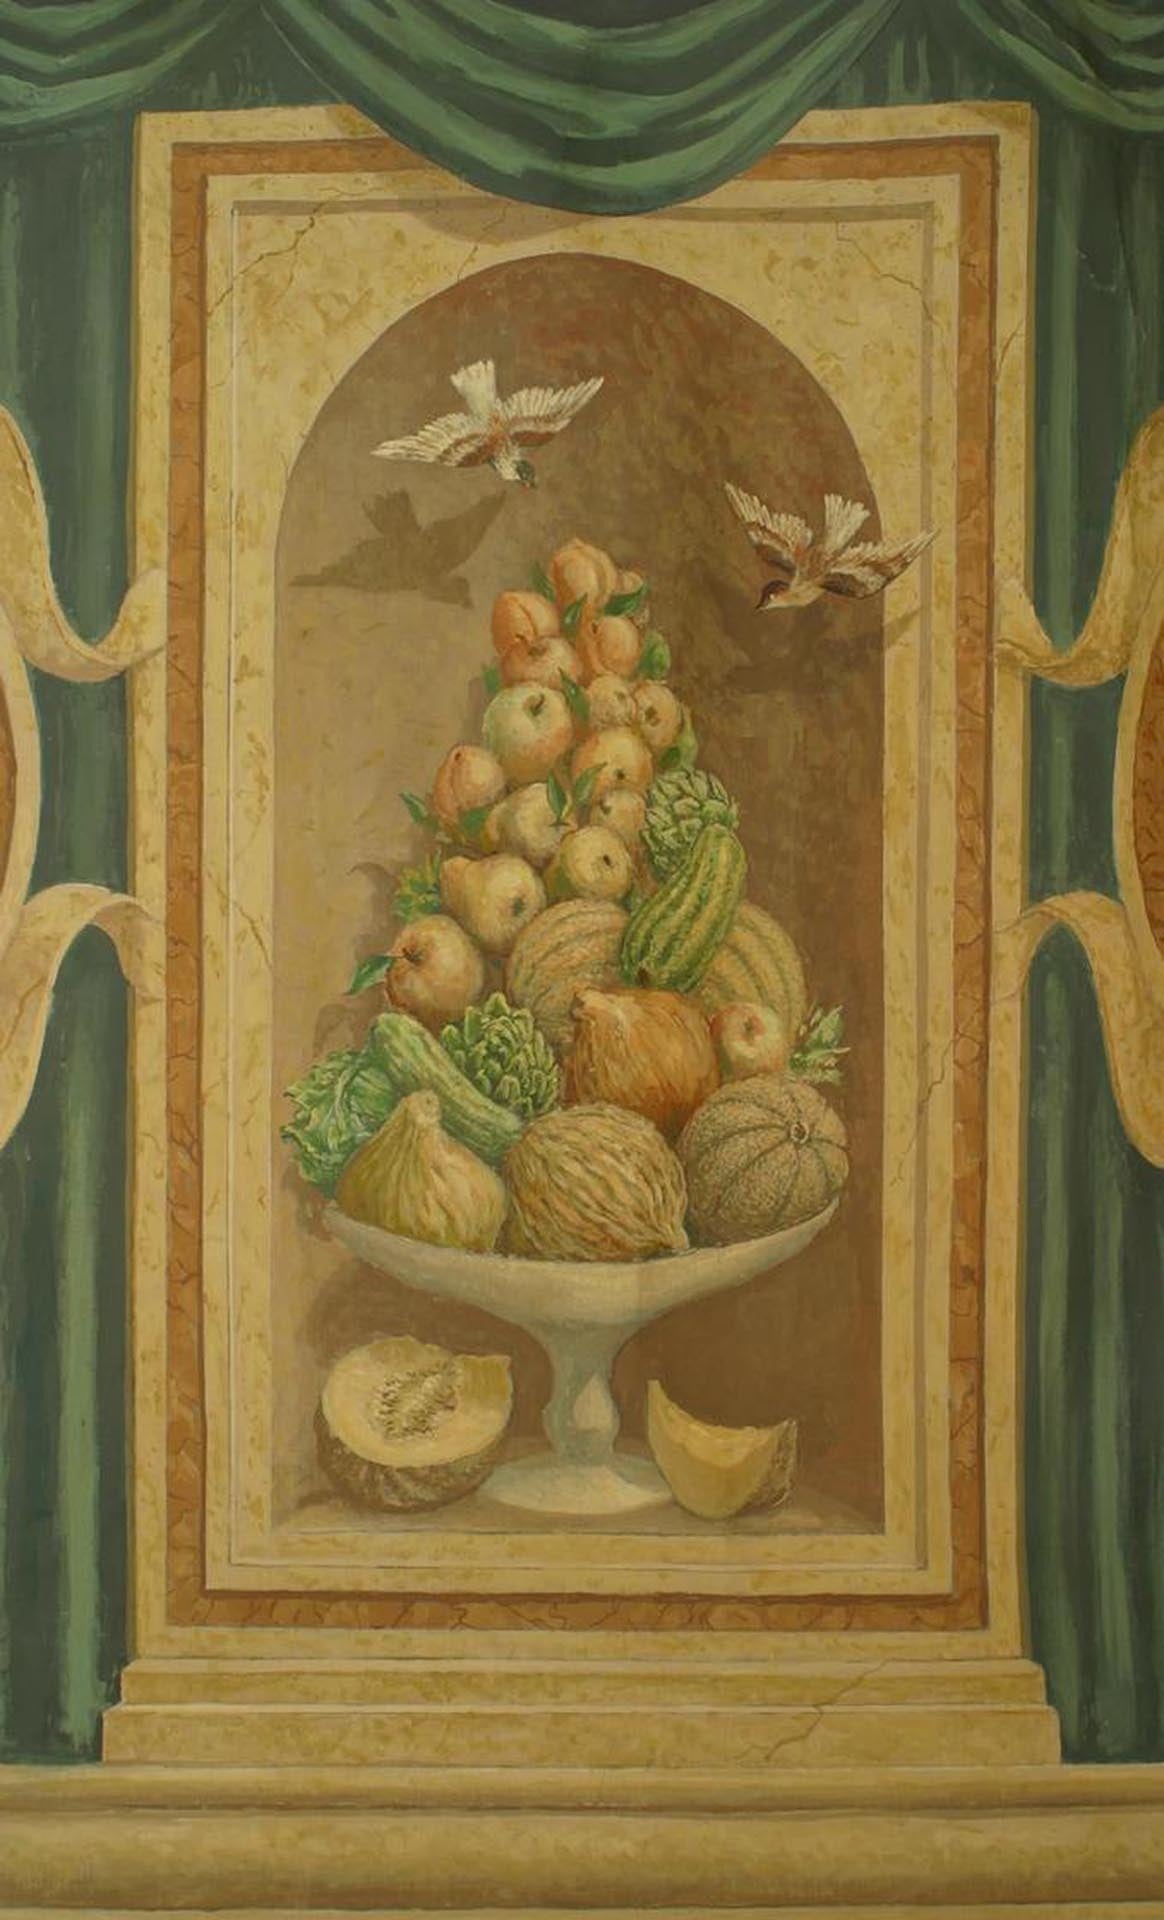 Italian Neo-classic style mural painting on canvas of a Pair of medallions with cupids centering a still life of fruit behind a blue drape with a swag valance
